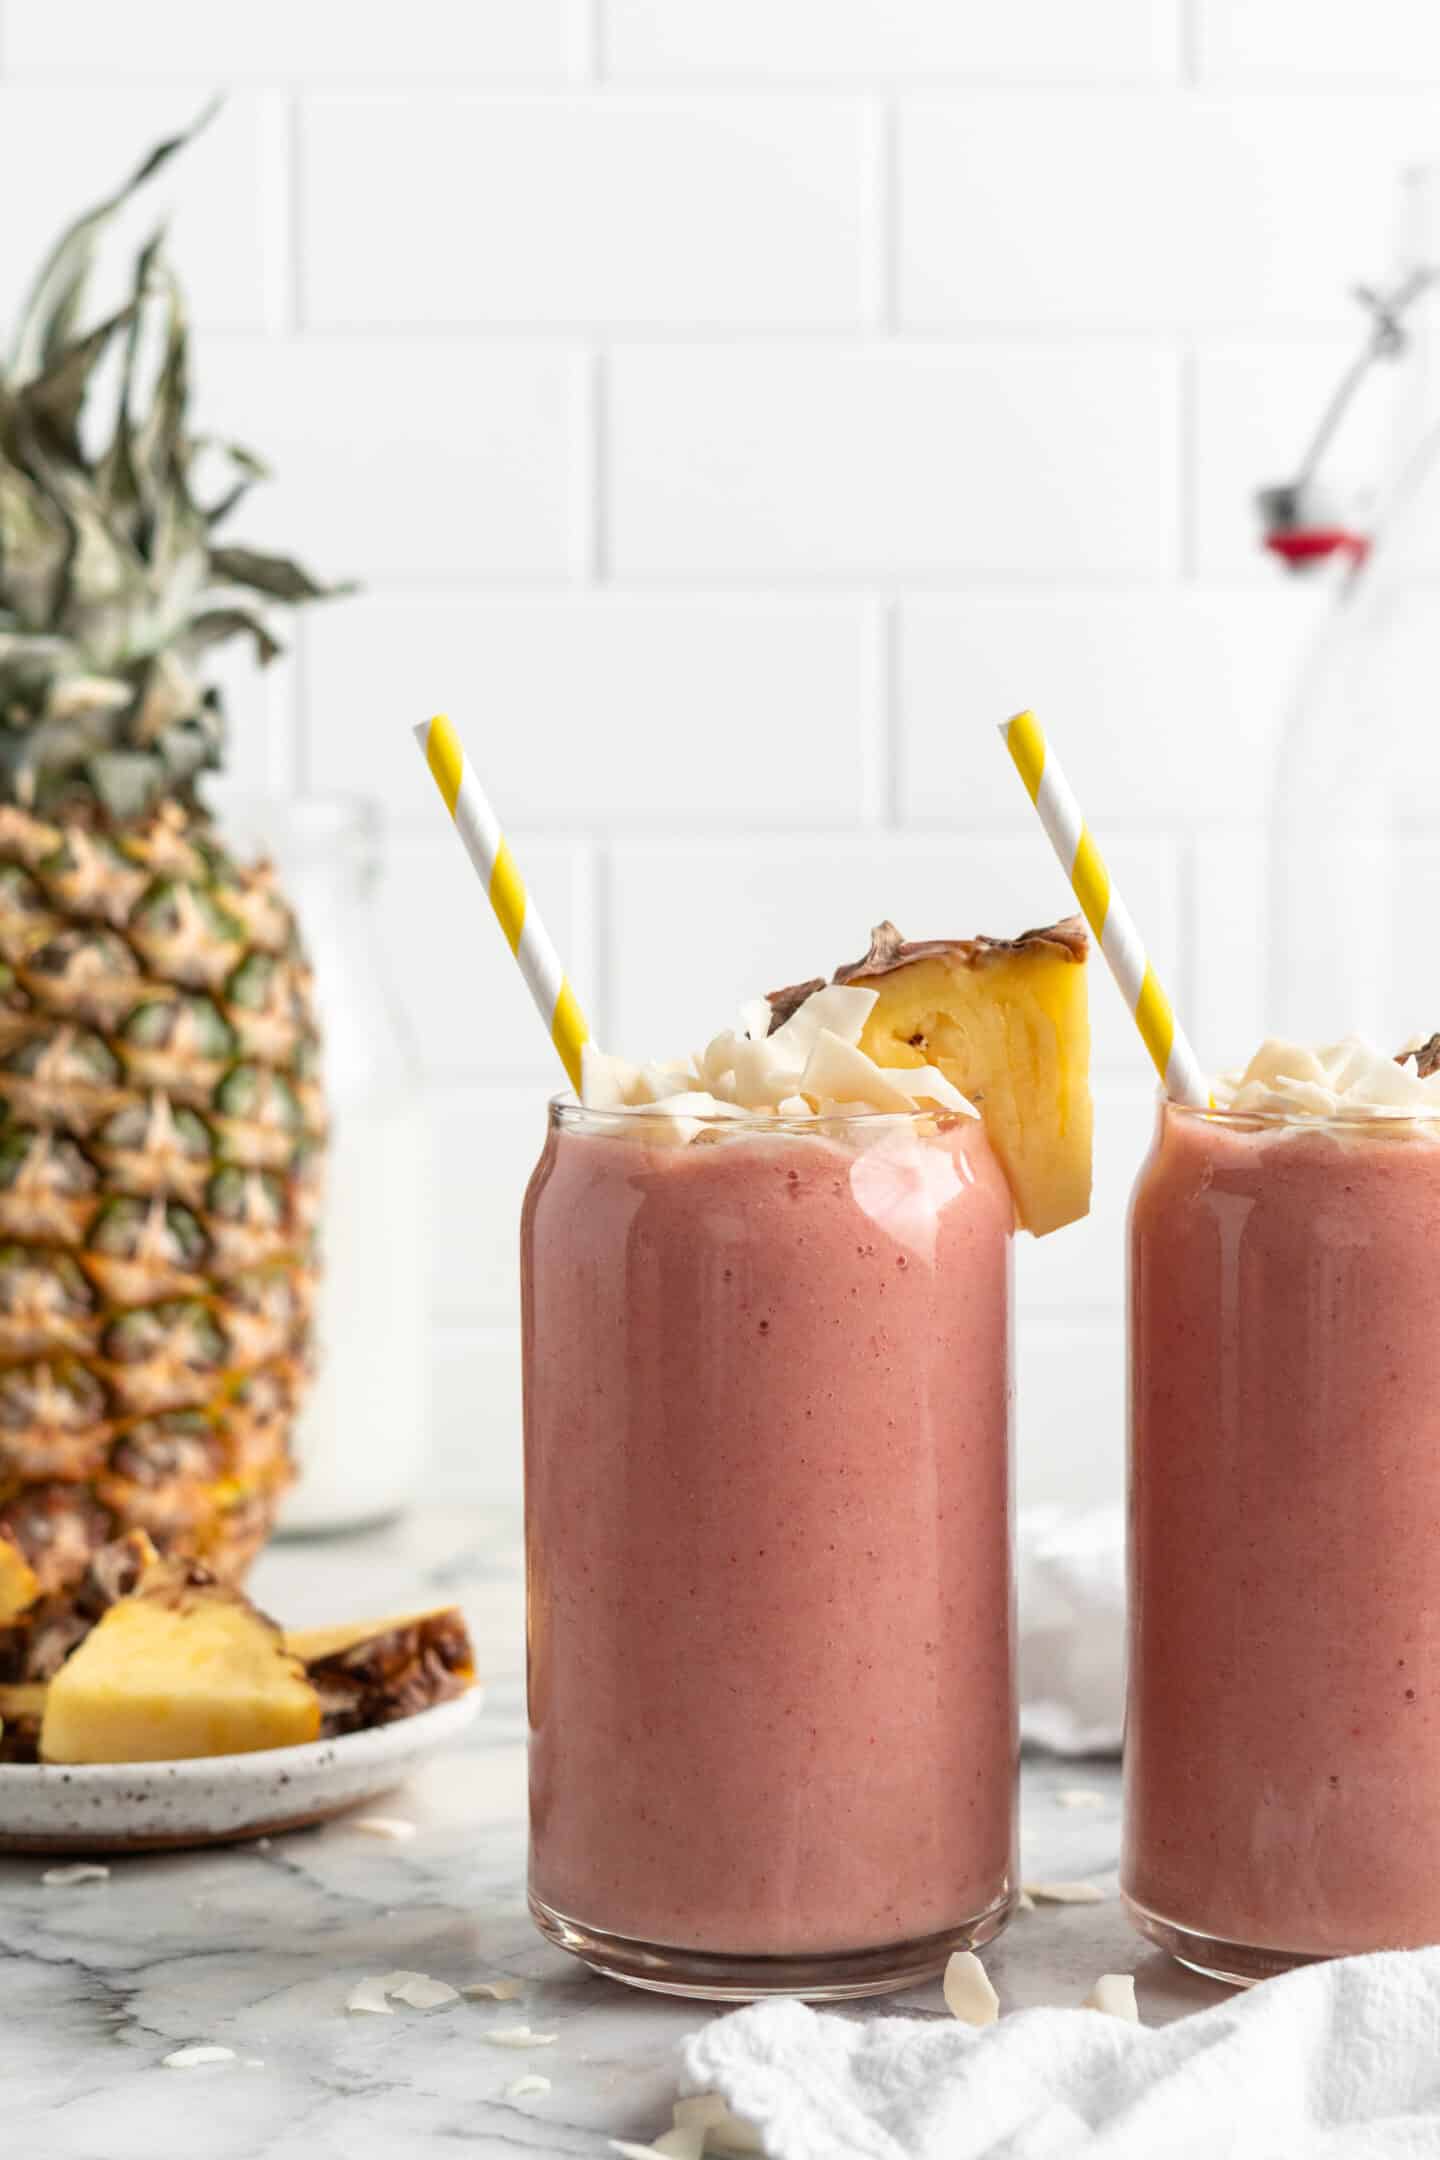 Two strawberry pineapple smoothies in glasses with straws, garnished with coconut flakes and pineapple wedge